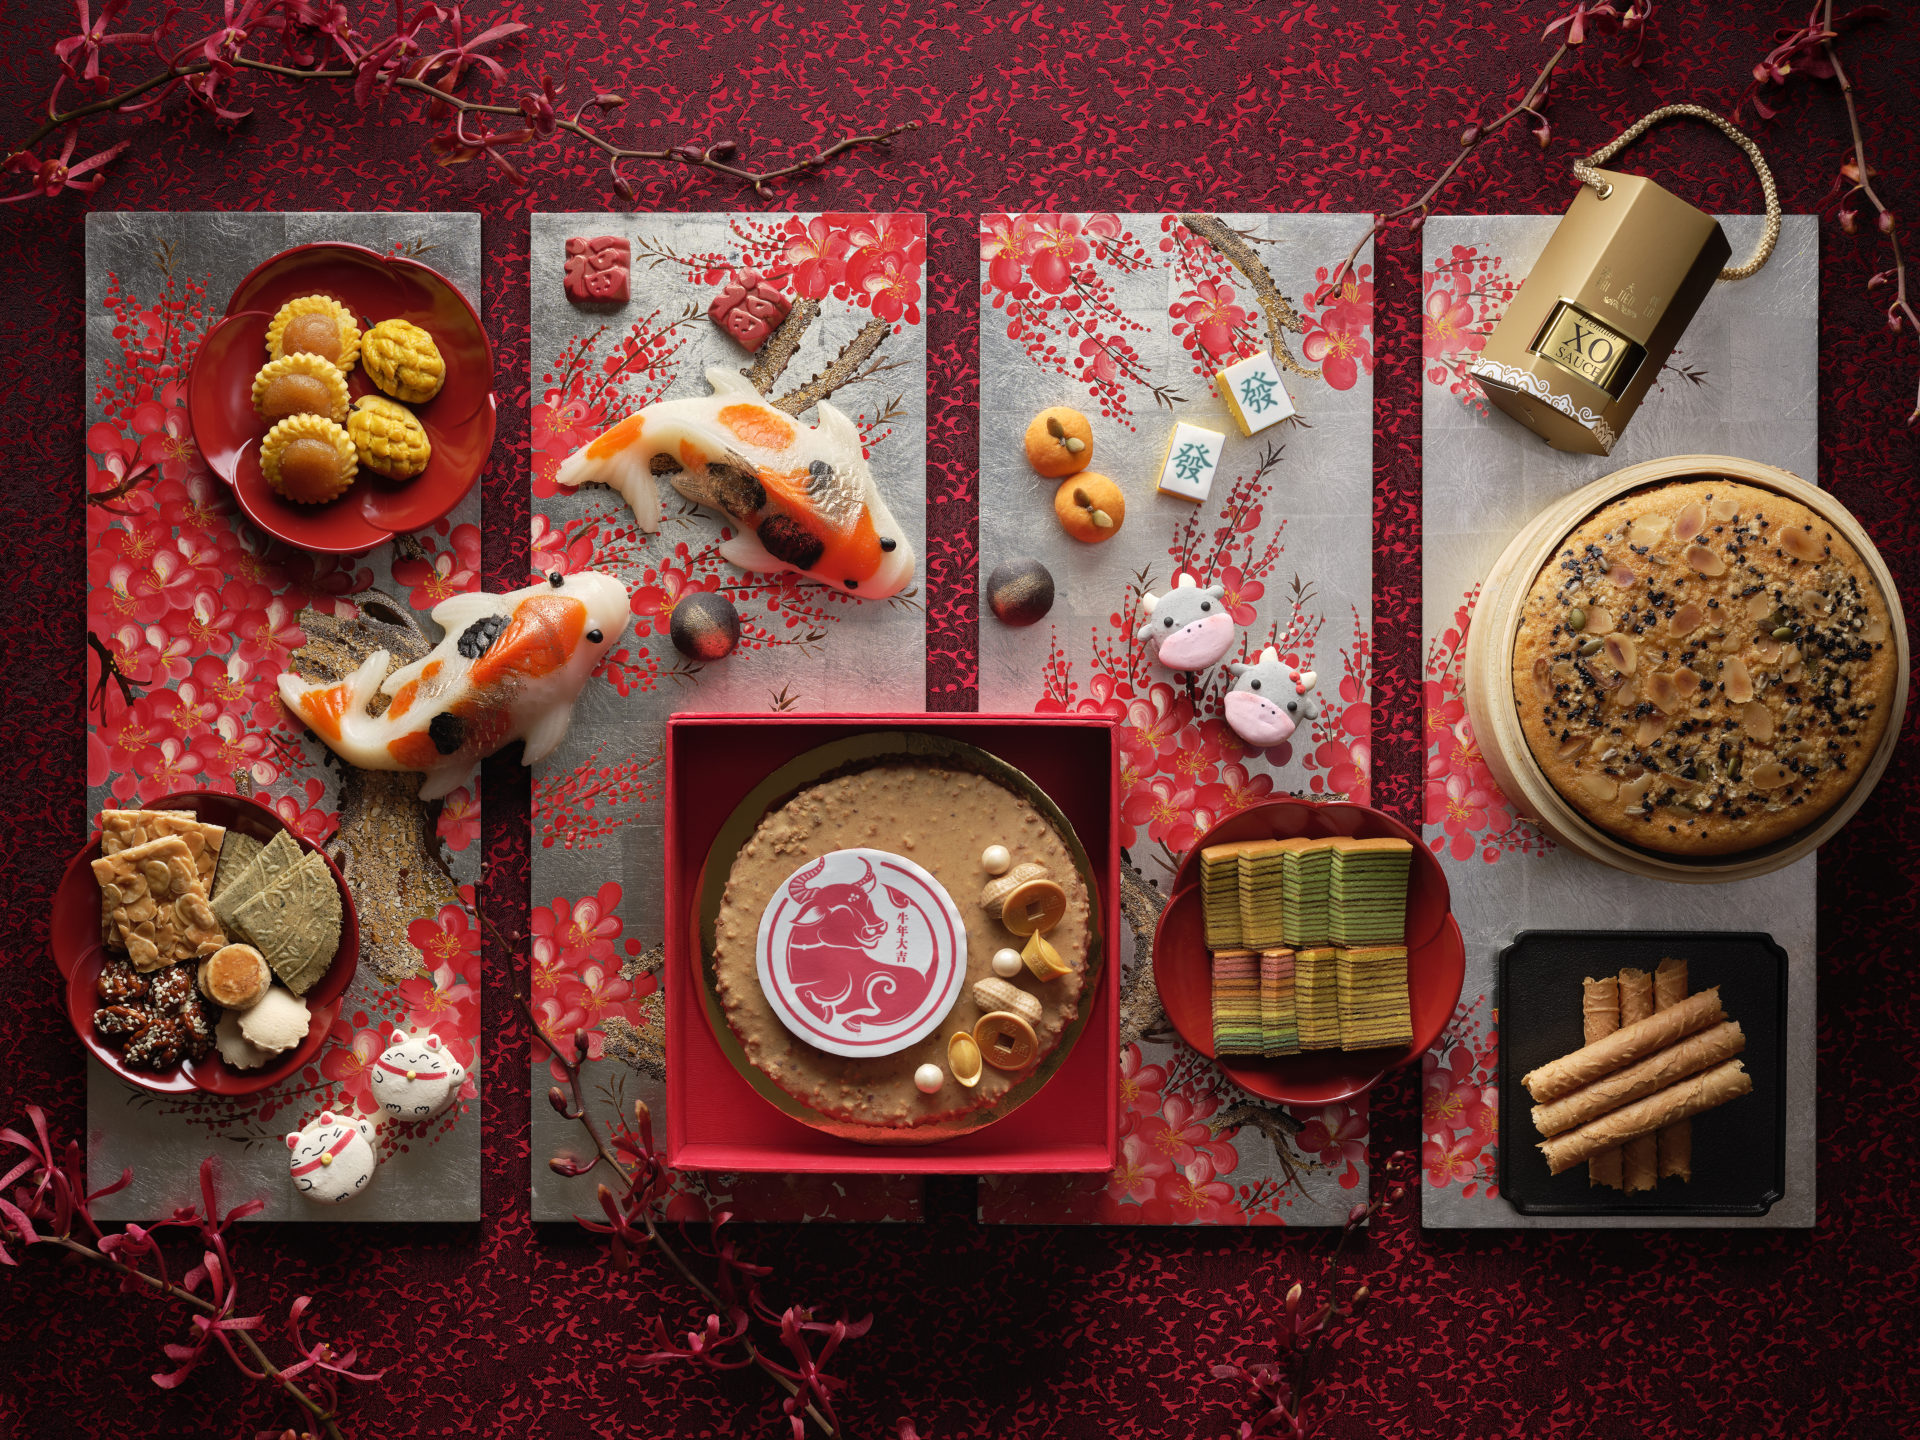 Pan Pacific Singapore's display of Chinese New Year Goodies including koi-shaped nian gao, animal zodiac macarons, pineapple tarts, bak kwa, kueh lapis and love letters. for Chinese New Year 2021. Delivery available islandwide in Singapore, powered by Oddle.